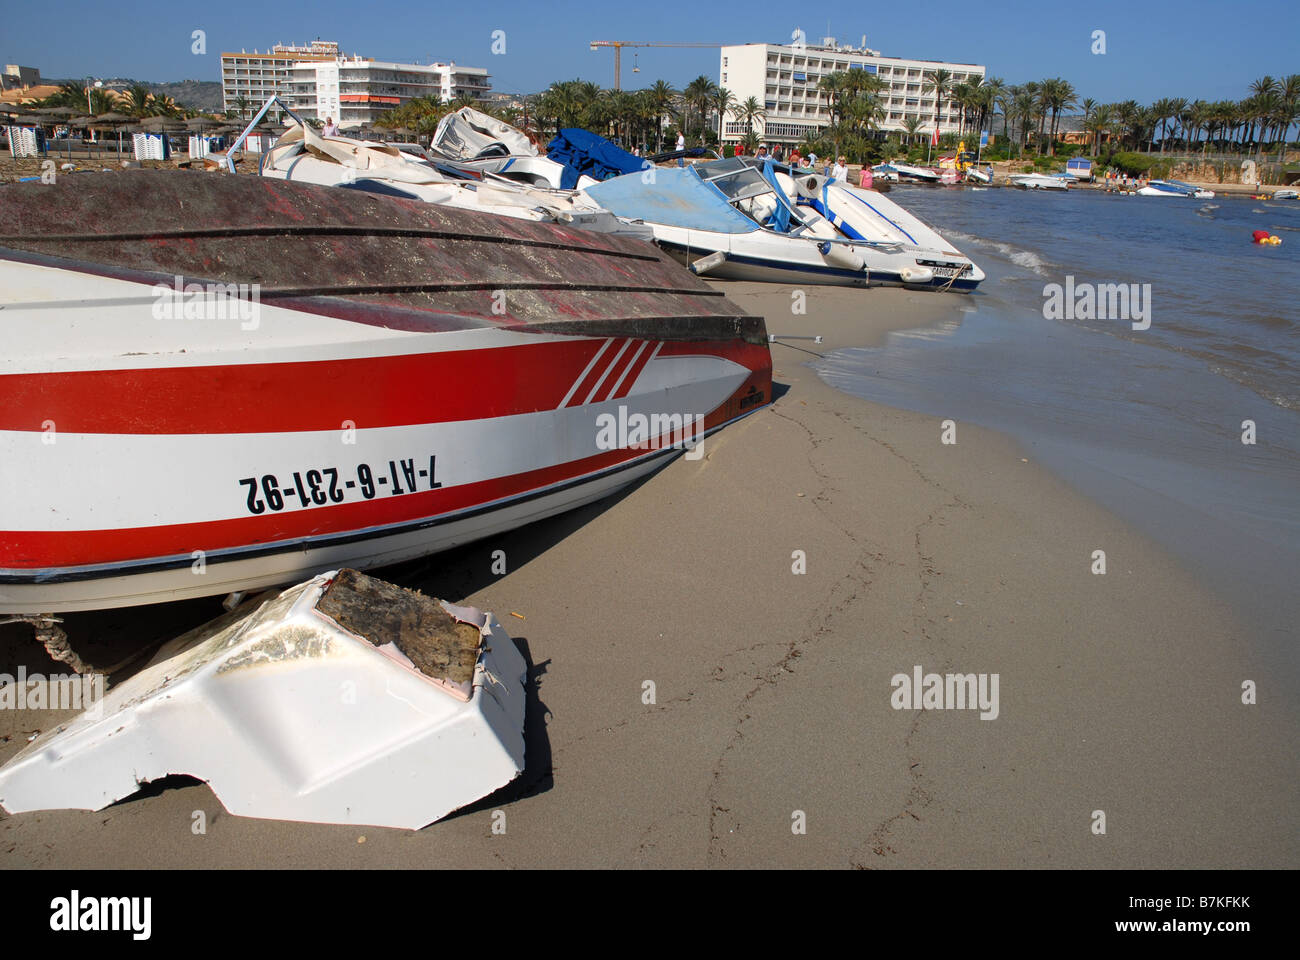 boats & debris washed up on Playa Arenal after storm, Oct 2007, Javea, Alicante Province,Valencia, Spain Stock Photo